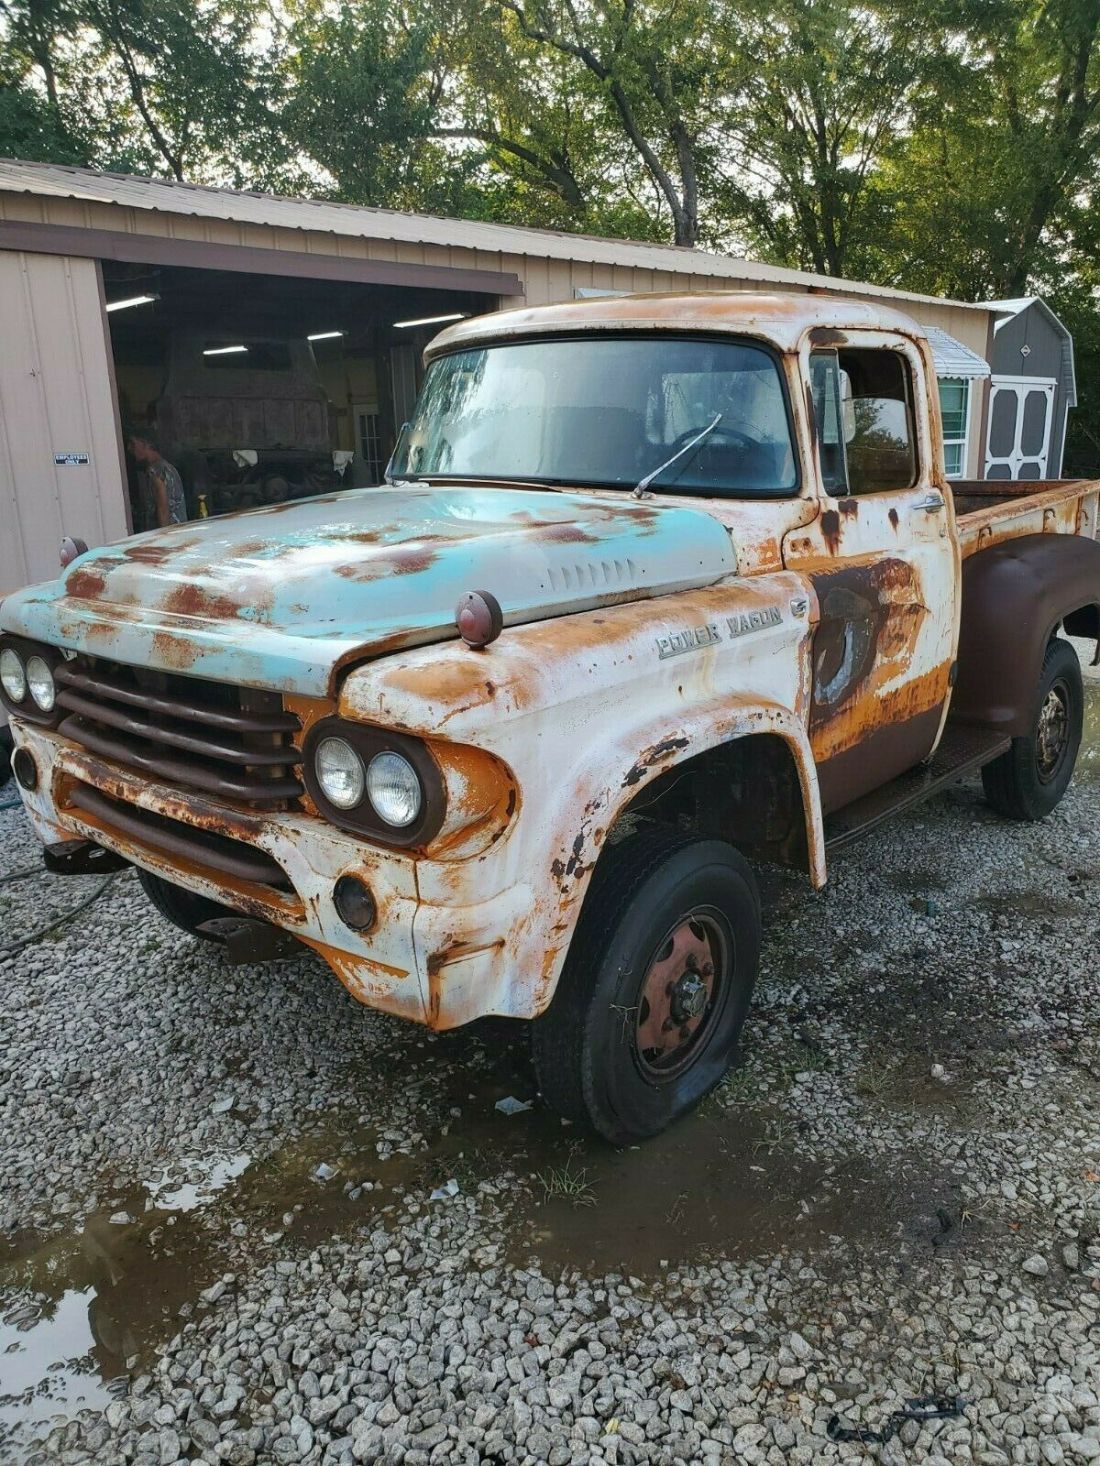 1958 Dodge Power Wagon W100 4x4 Dually Shortbed For Sale Dodge